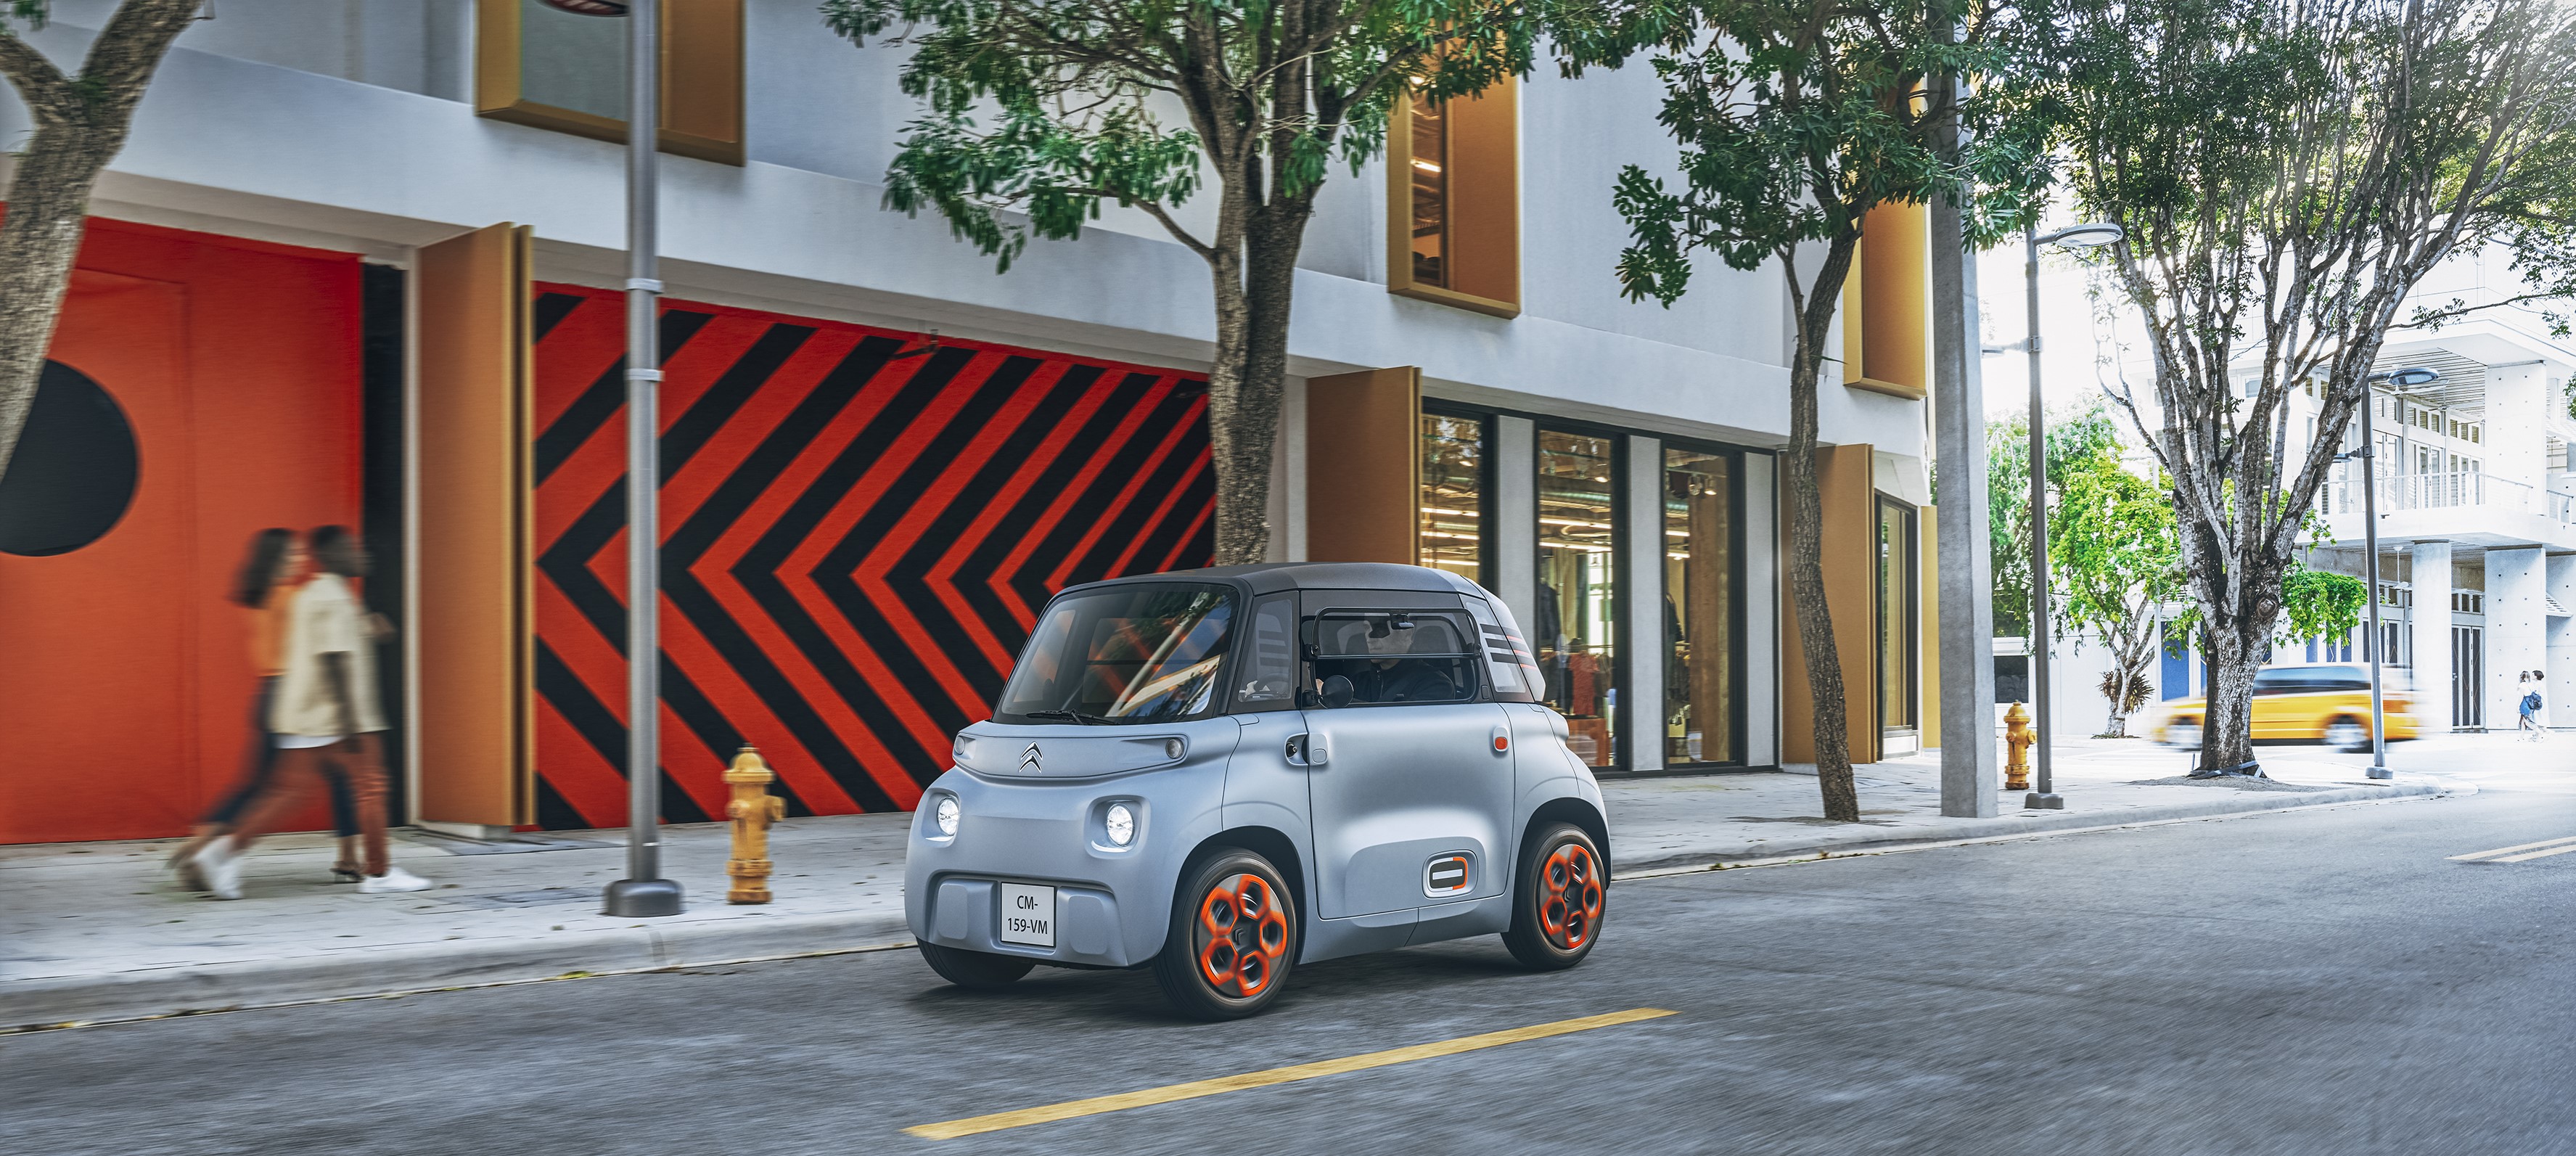 News – Citroën Ami: a 100% electric vehicle for new mobility - MTA